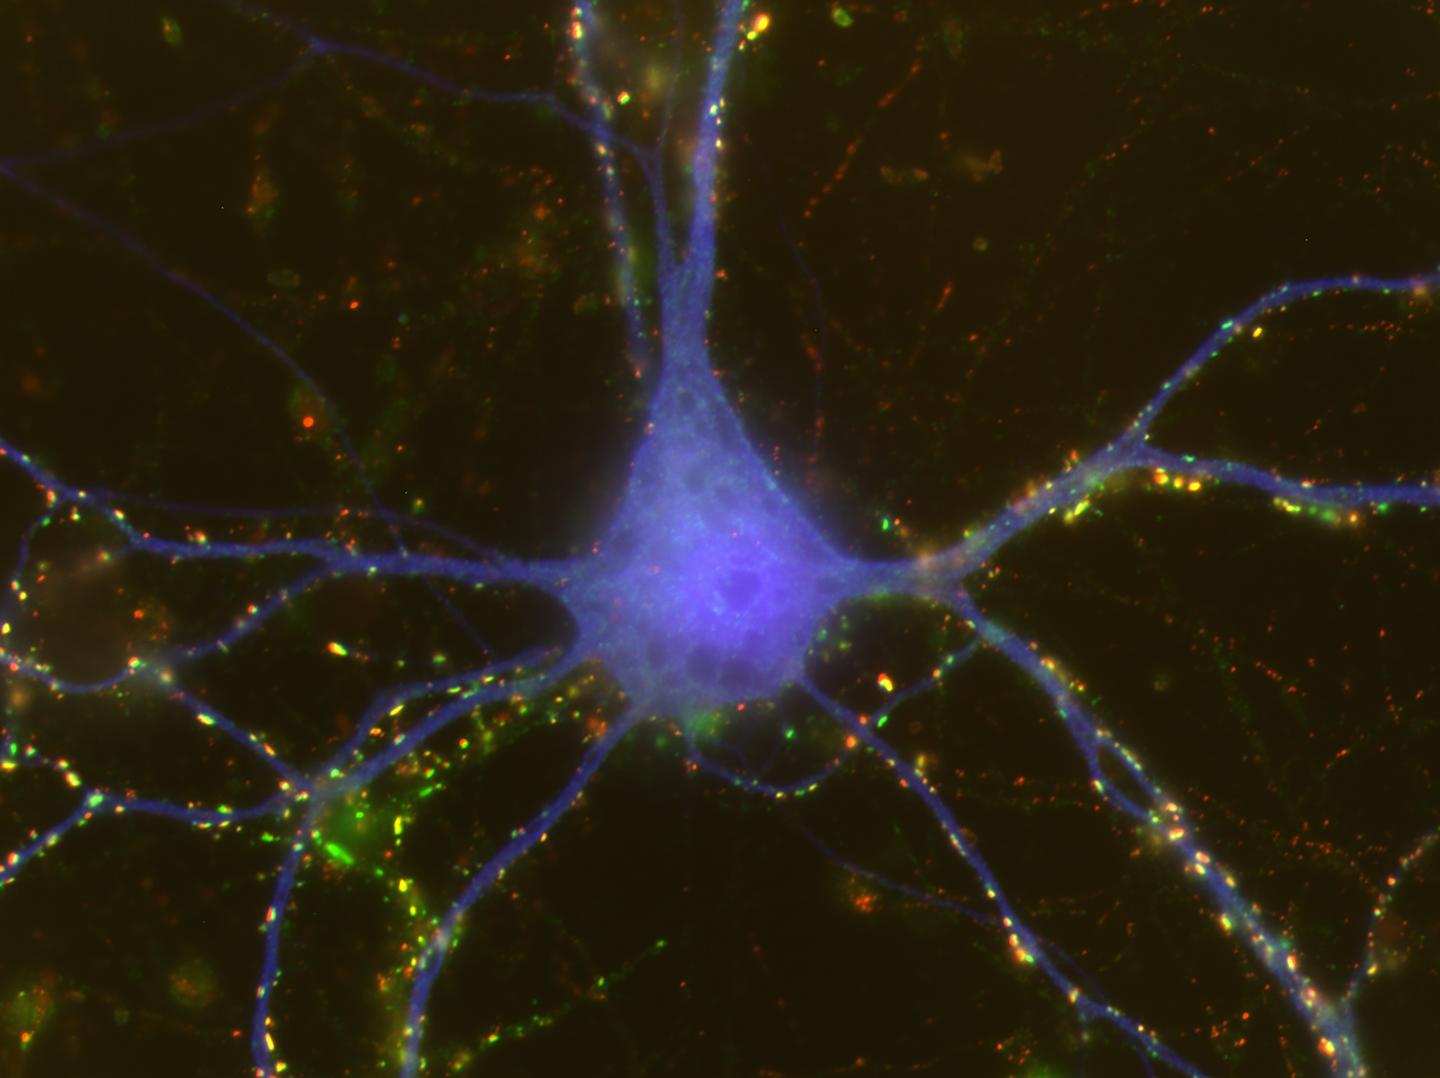 Cortical Neuron Making Connections